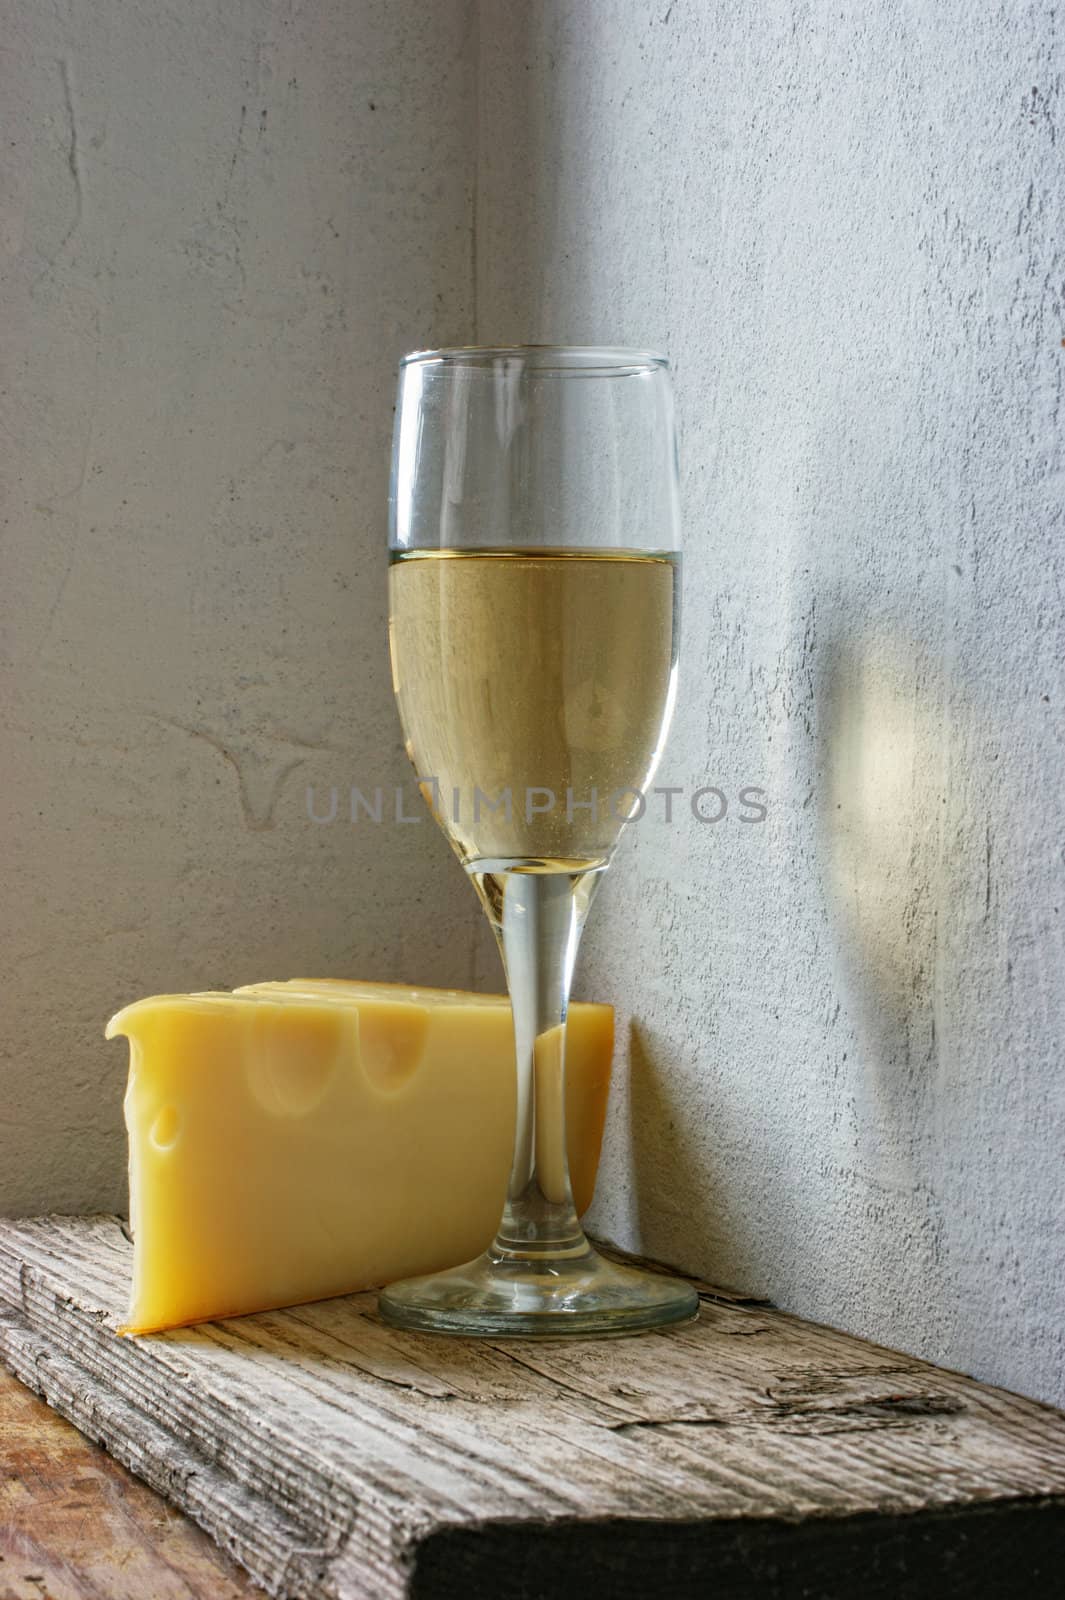 A glass of wine and cheese  by oleg_zhukov